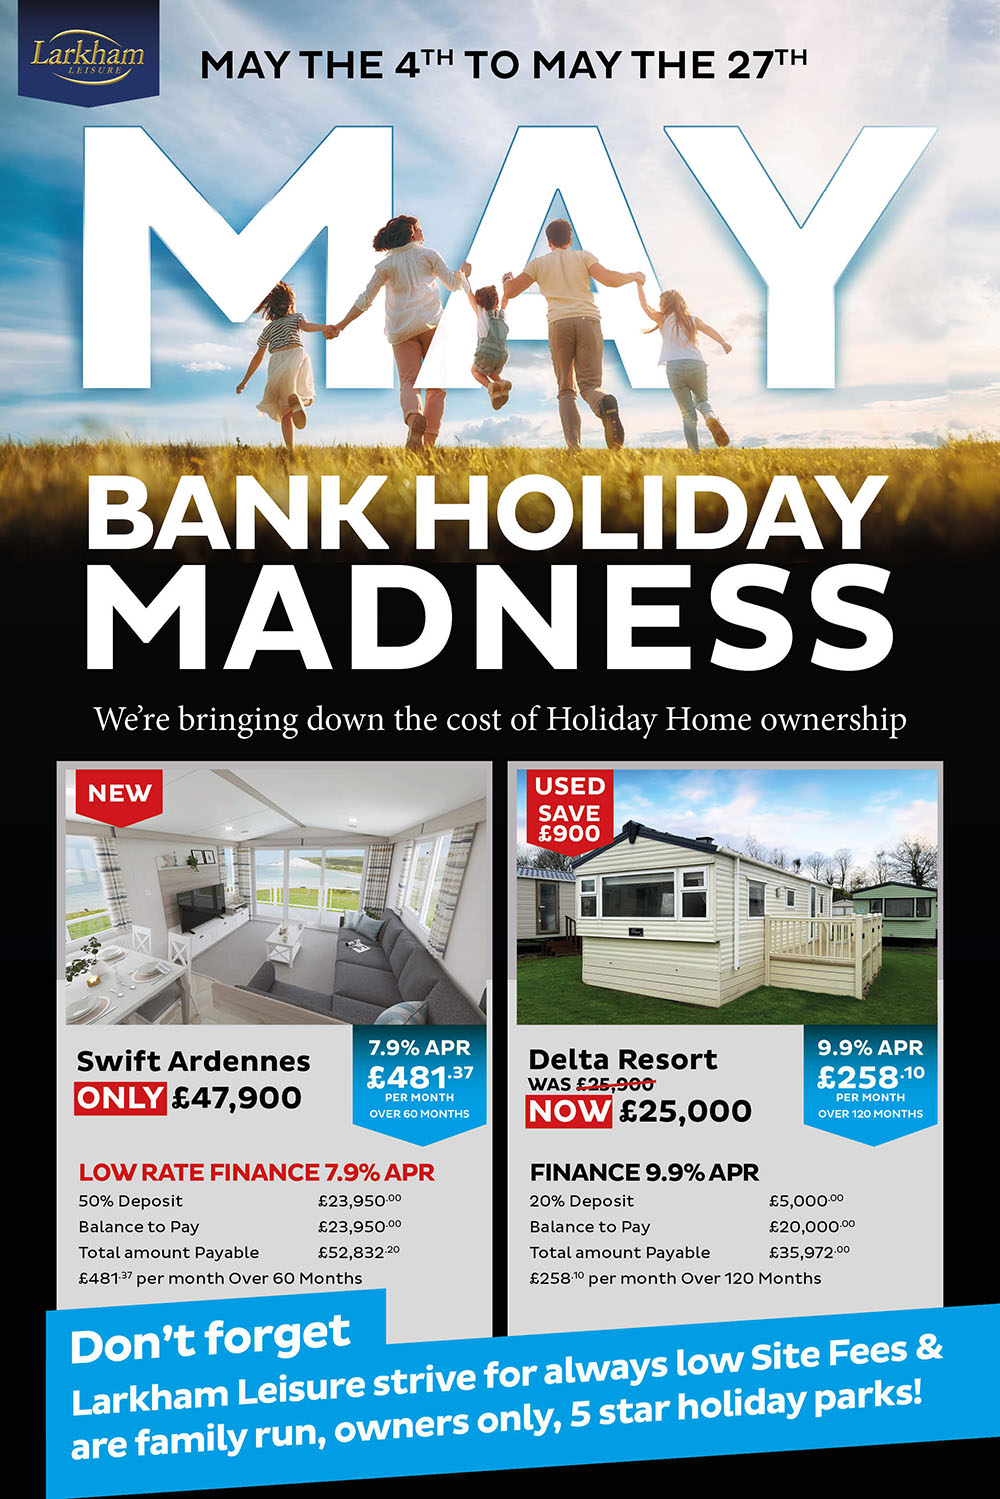 May 4th to May 27th - Bank Holiday Madness. We are bringing down the cost of Holiday Home ownership.